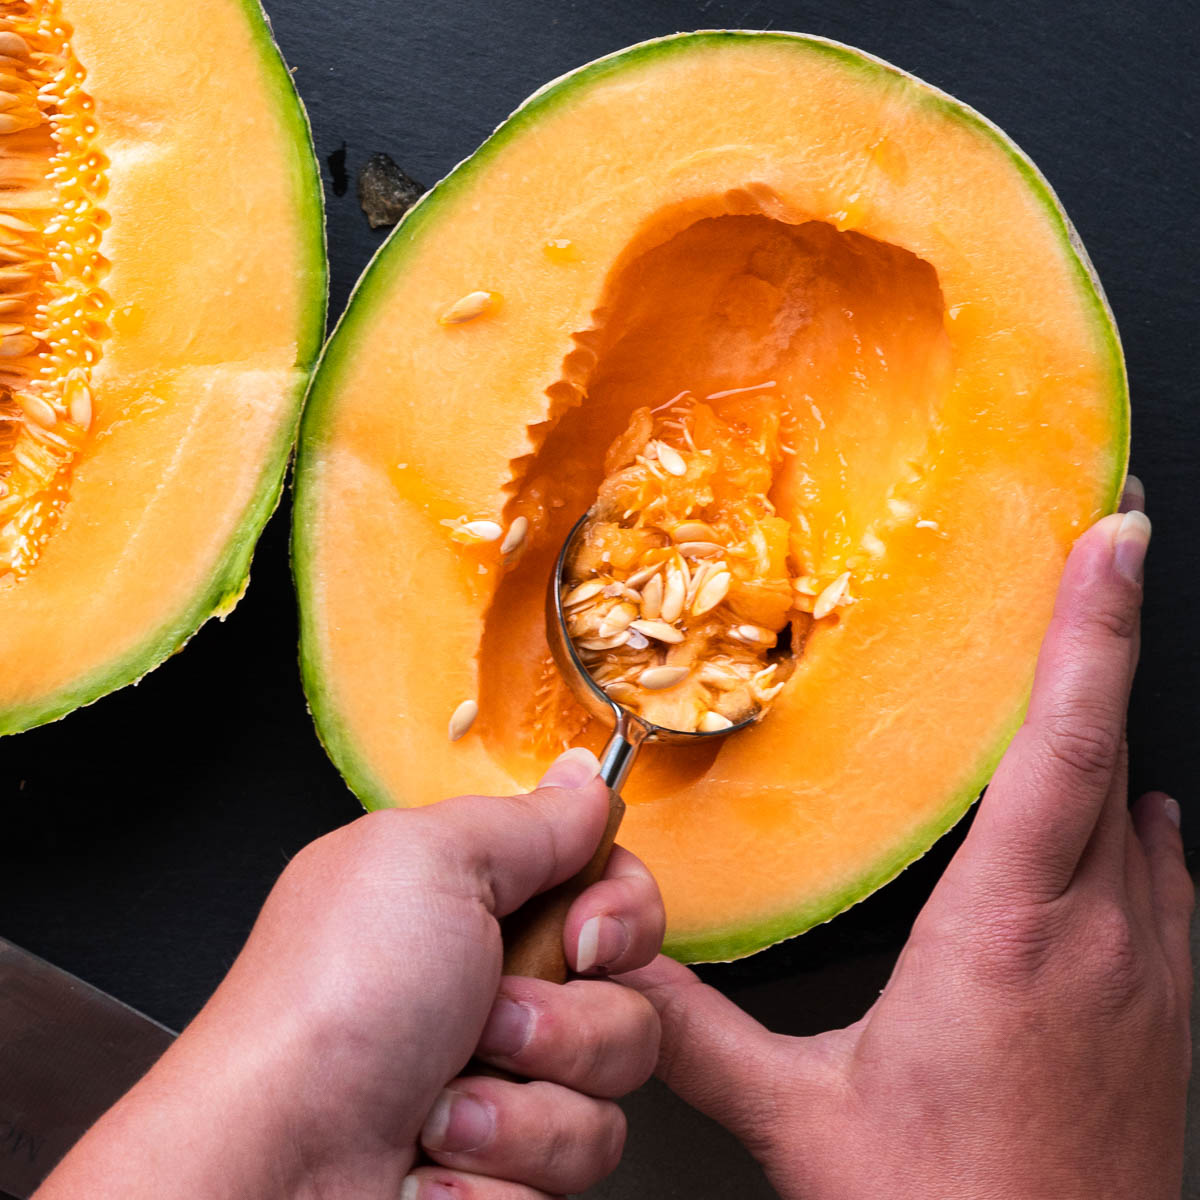 how to cut a cantaloupe steps: scoop out the seeds